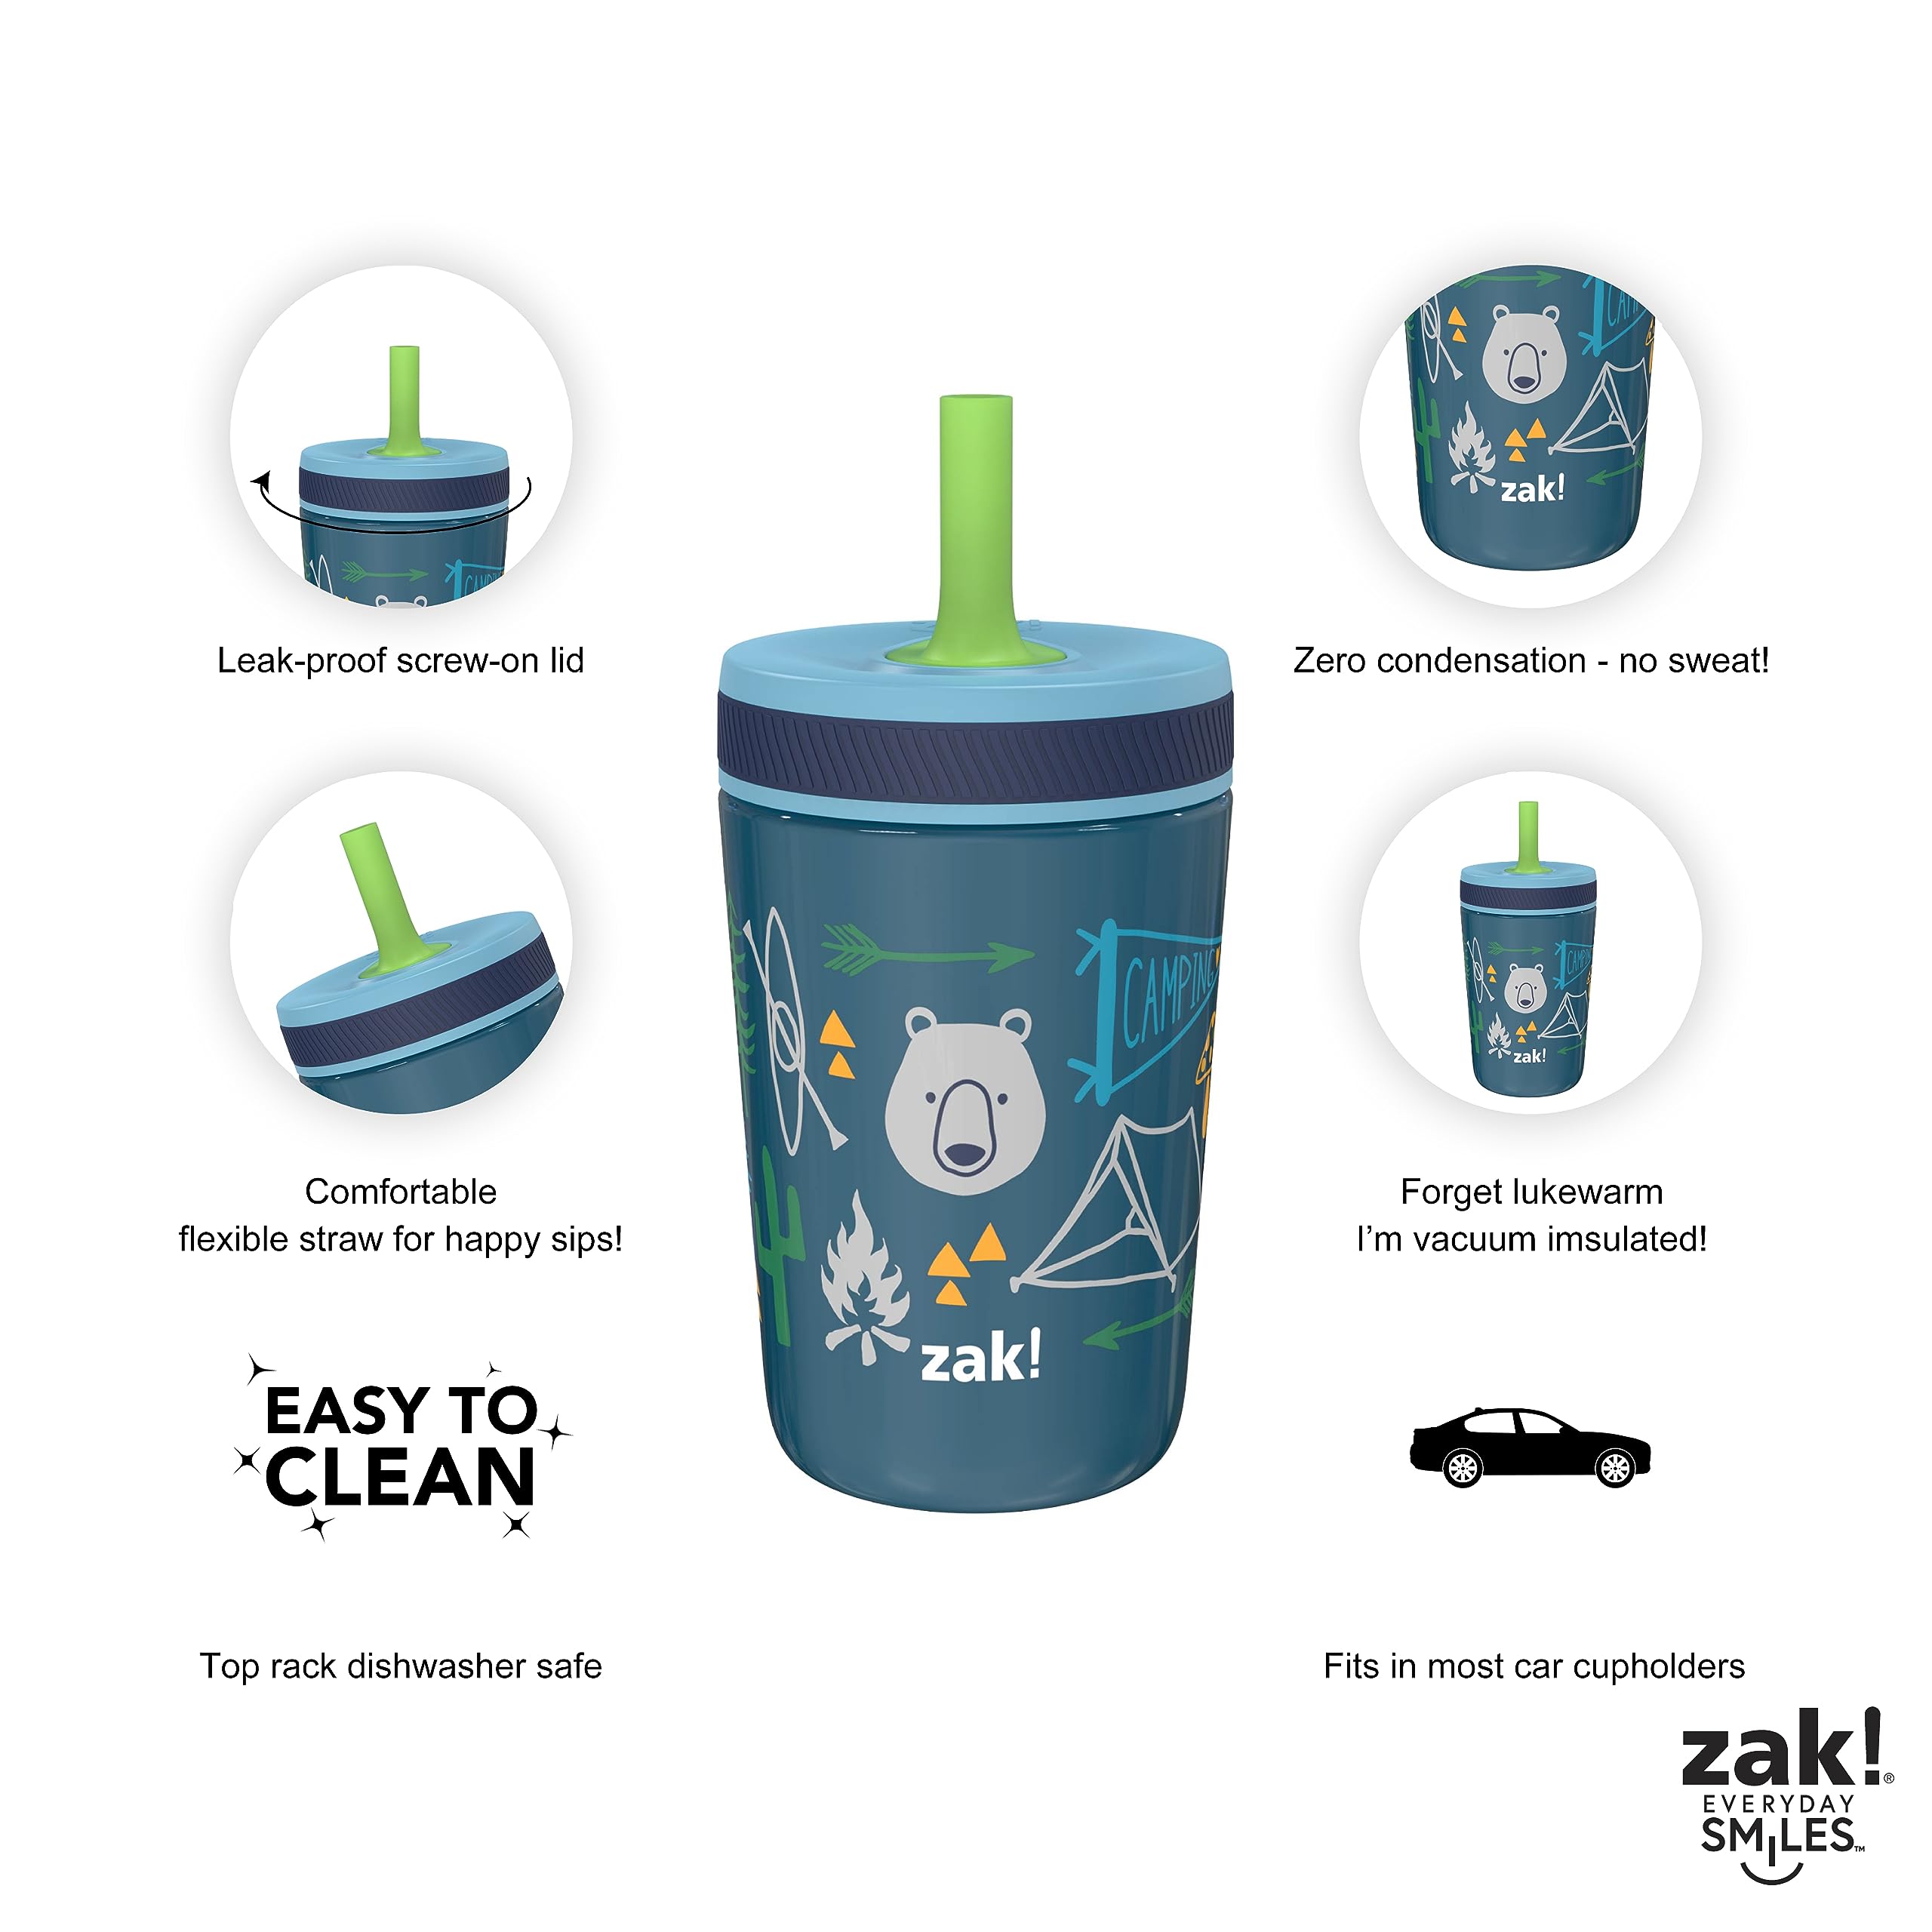 Zak Designs Campout and Camping Kelso Tumbler Set, Leak-Proof Screw-On Lid with Straw, Bundle for Kids Includes Plastic and Stainless Steel Cups with Bonus Sipper, 3pc Set, Non-BPA,15 fl oz